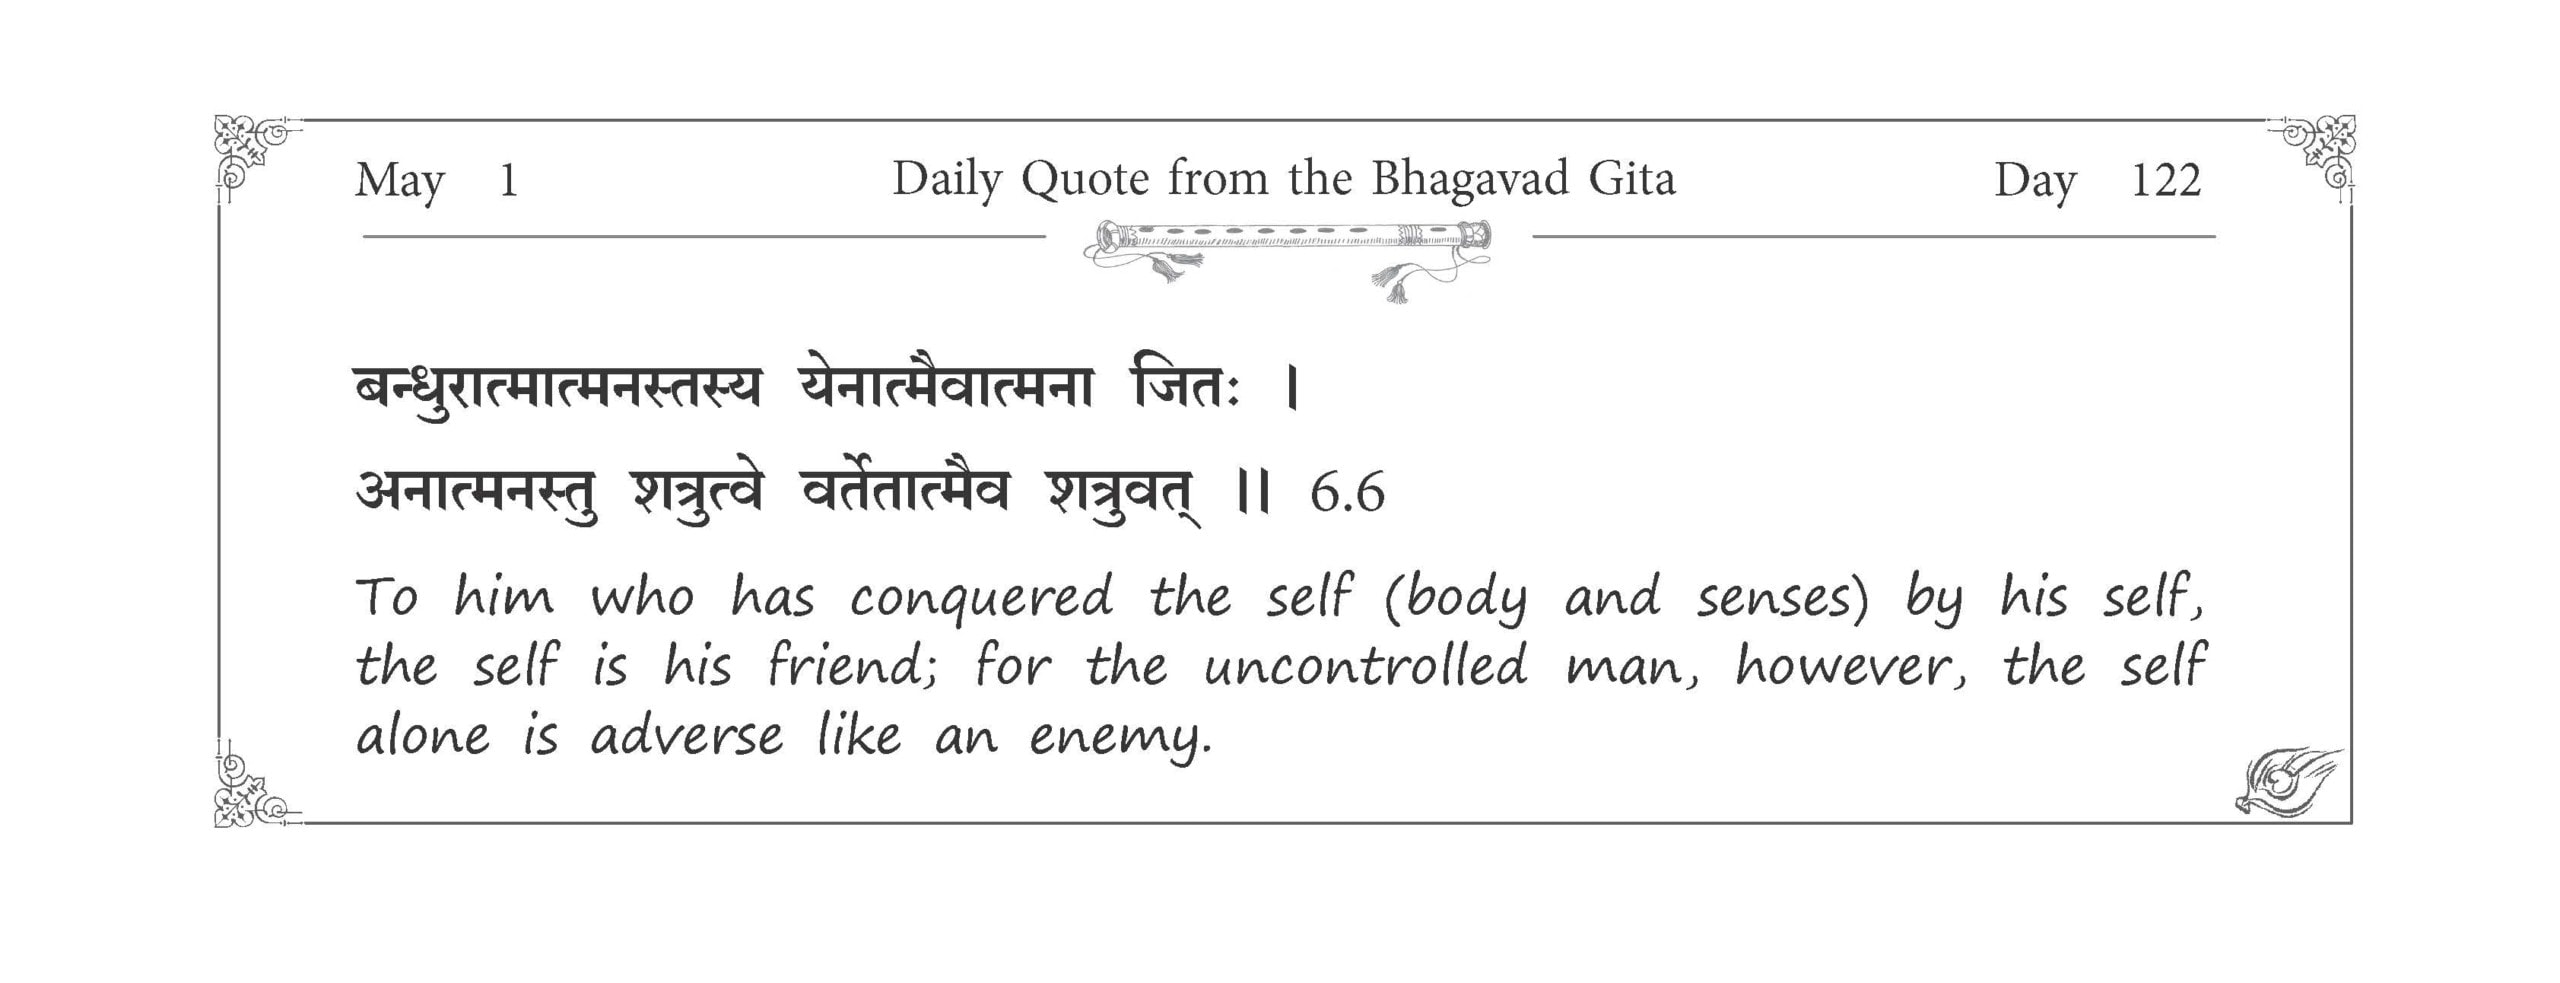 Celestial Chimes - Daily Quote from the Bhagavad Gita